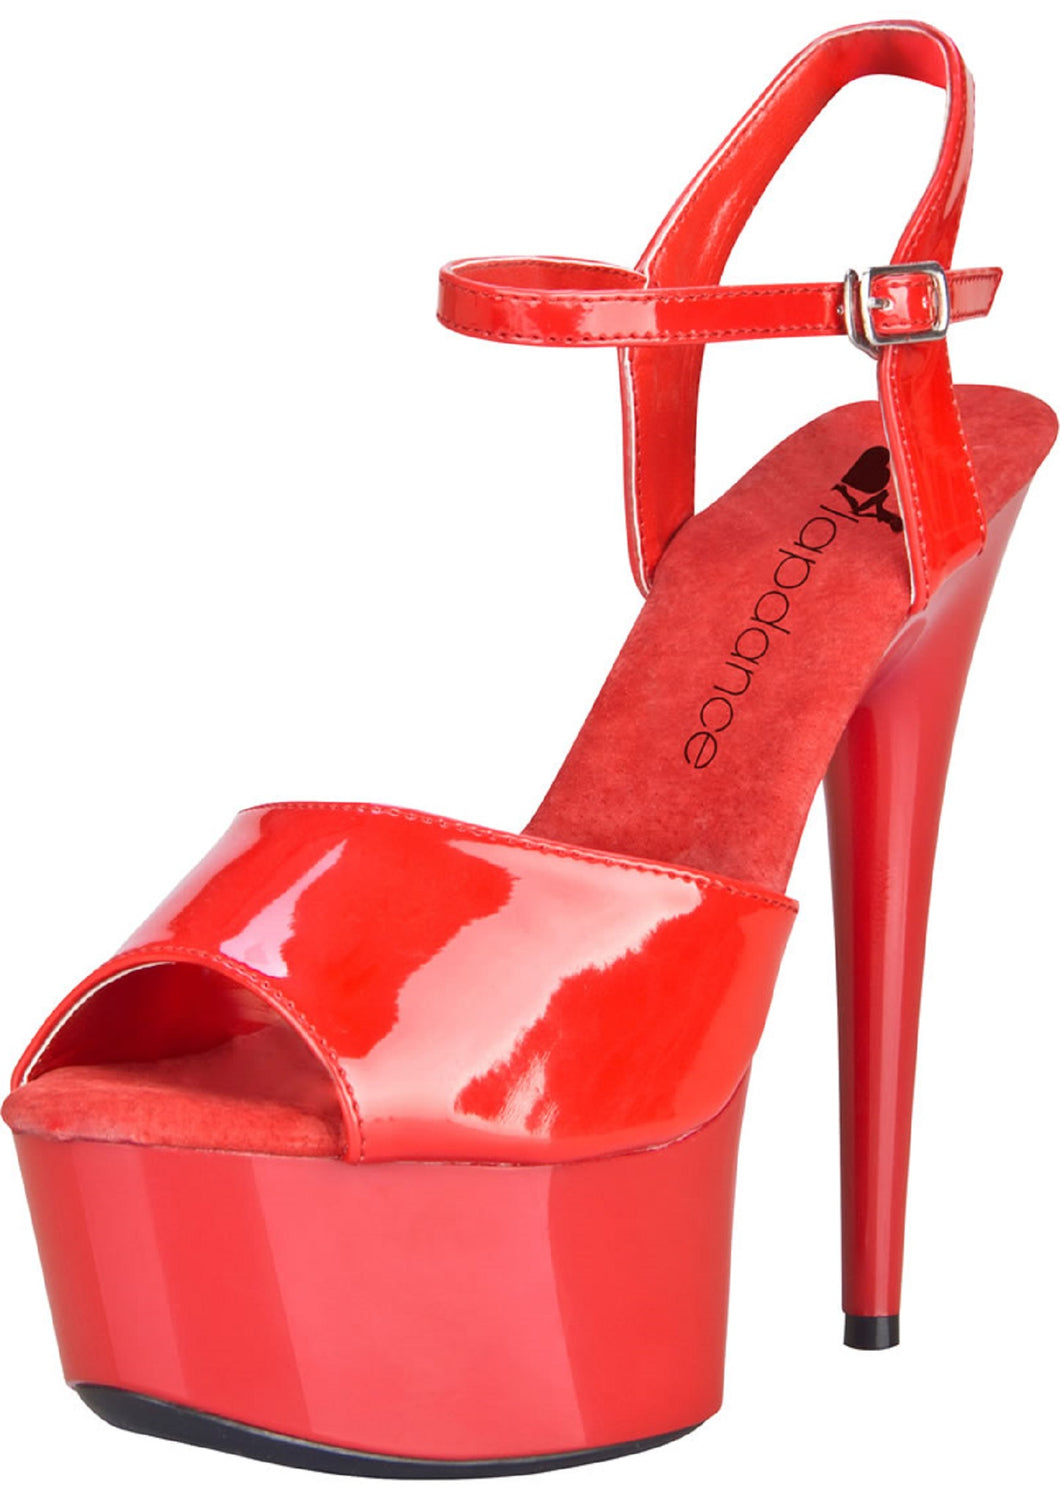 Red Platform Sandal With Quick Release Strap 6in Heel Size 7. - Beautiful Stranger 2020